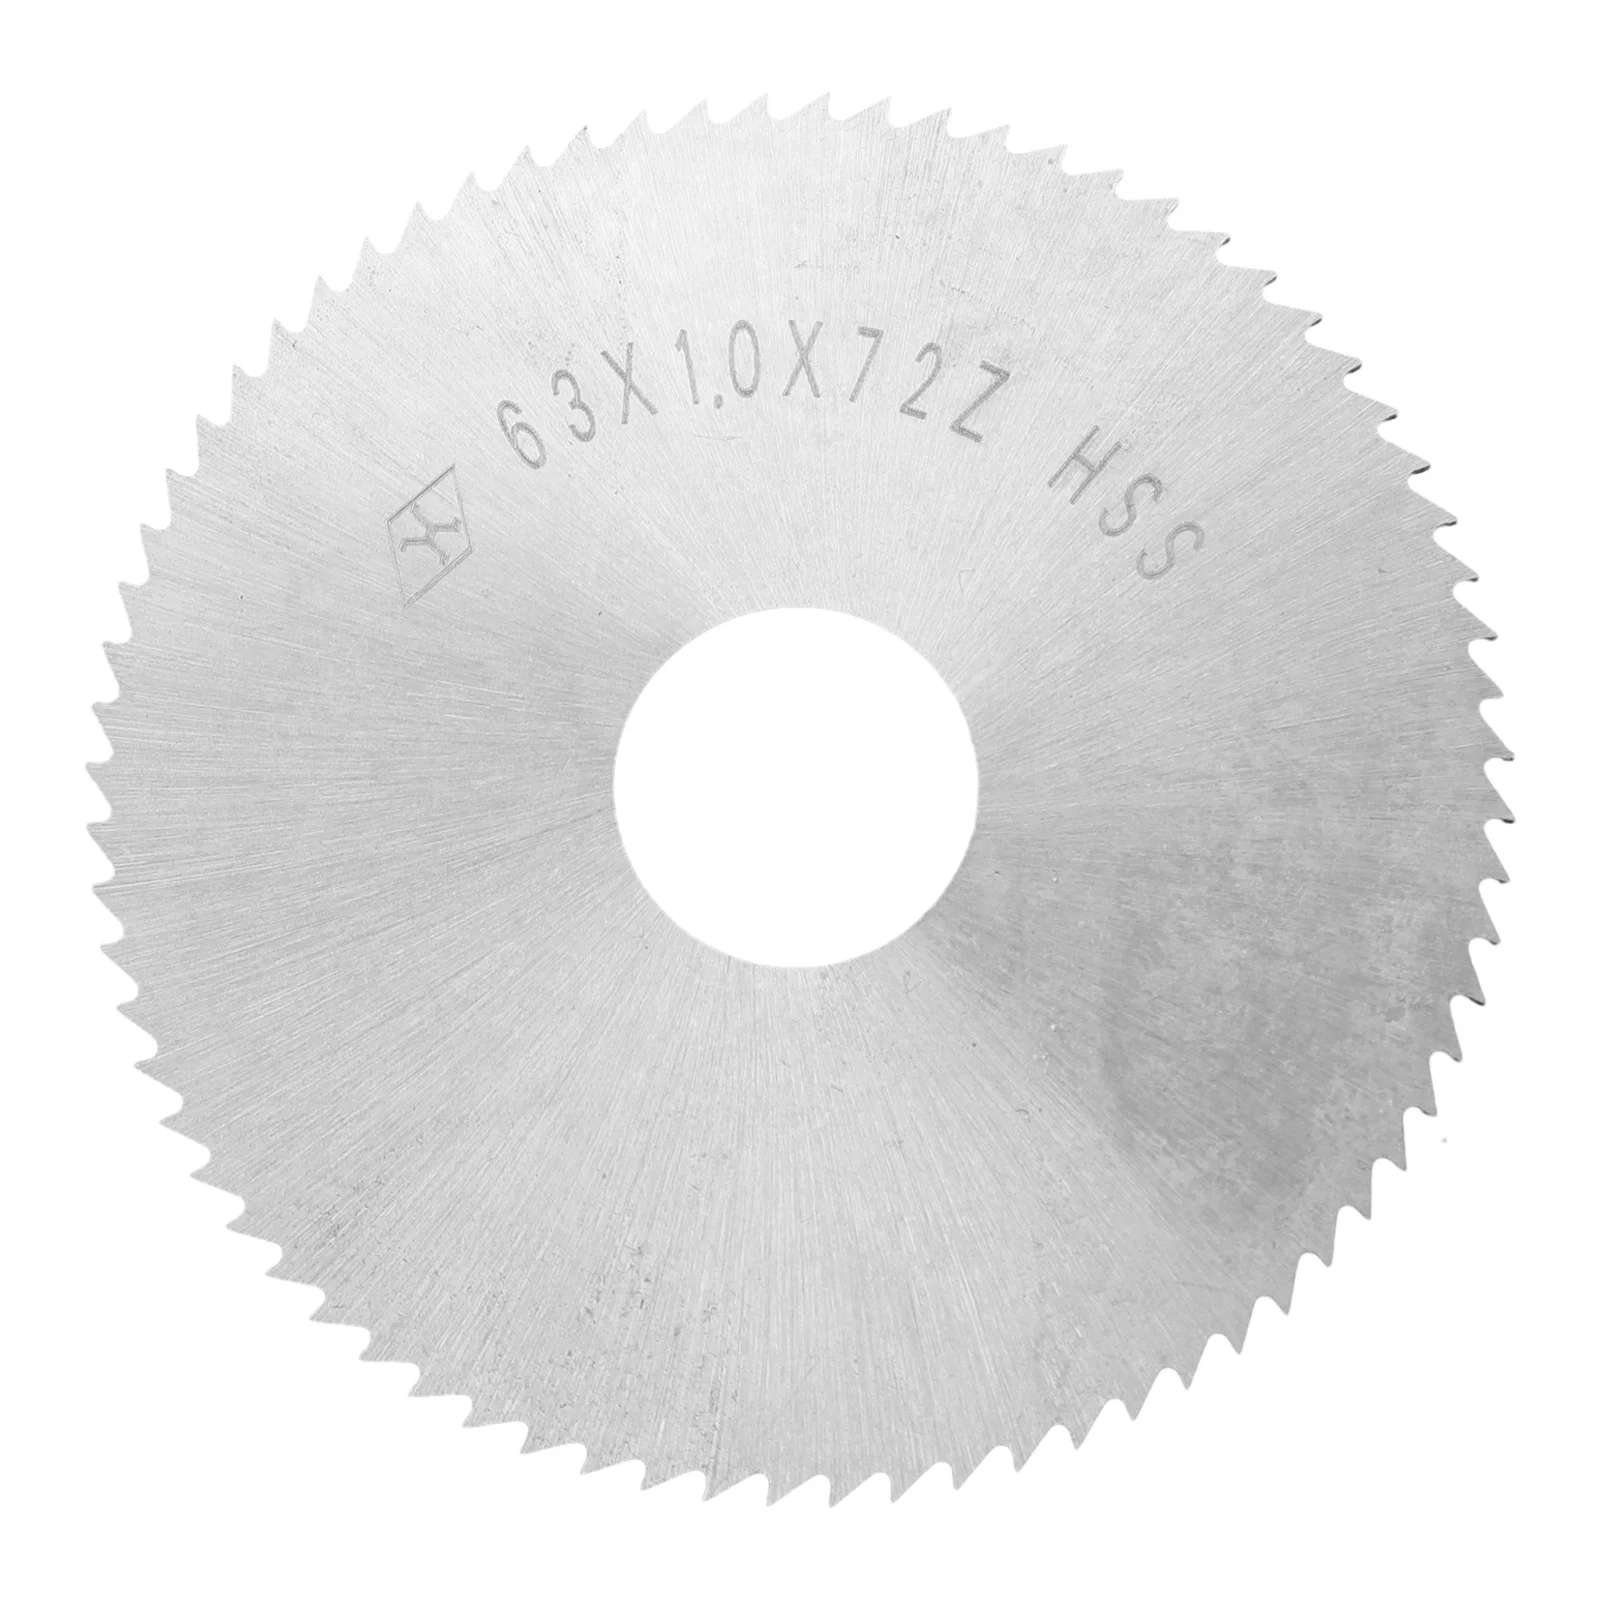 110mm diameter 15mm height 8mm axle hole small vane impellers iron steel blade Fast Cutting Mm Bore Diameter Saw Blade Mm Bore Diameter Plastic Steel Jewelers Metals And Soft Other Light Copper